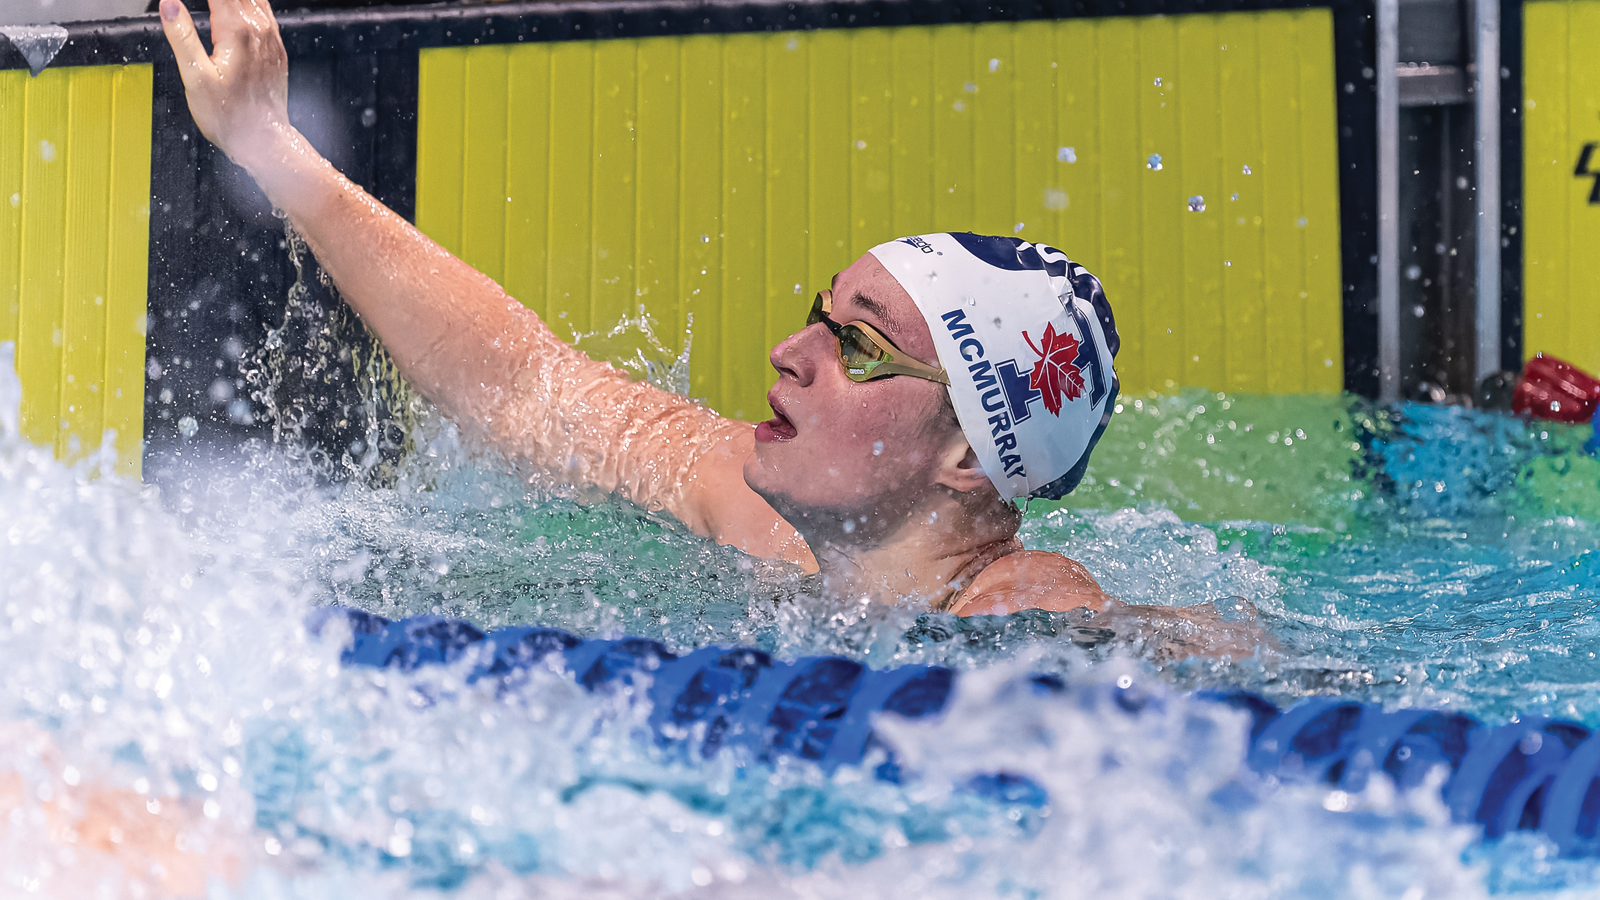 Toronto women's swimmer Ainsley McMurray hanging on to the wall in the pool after a race